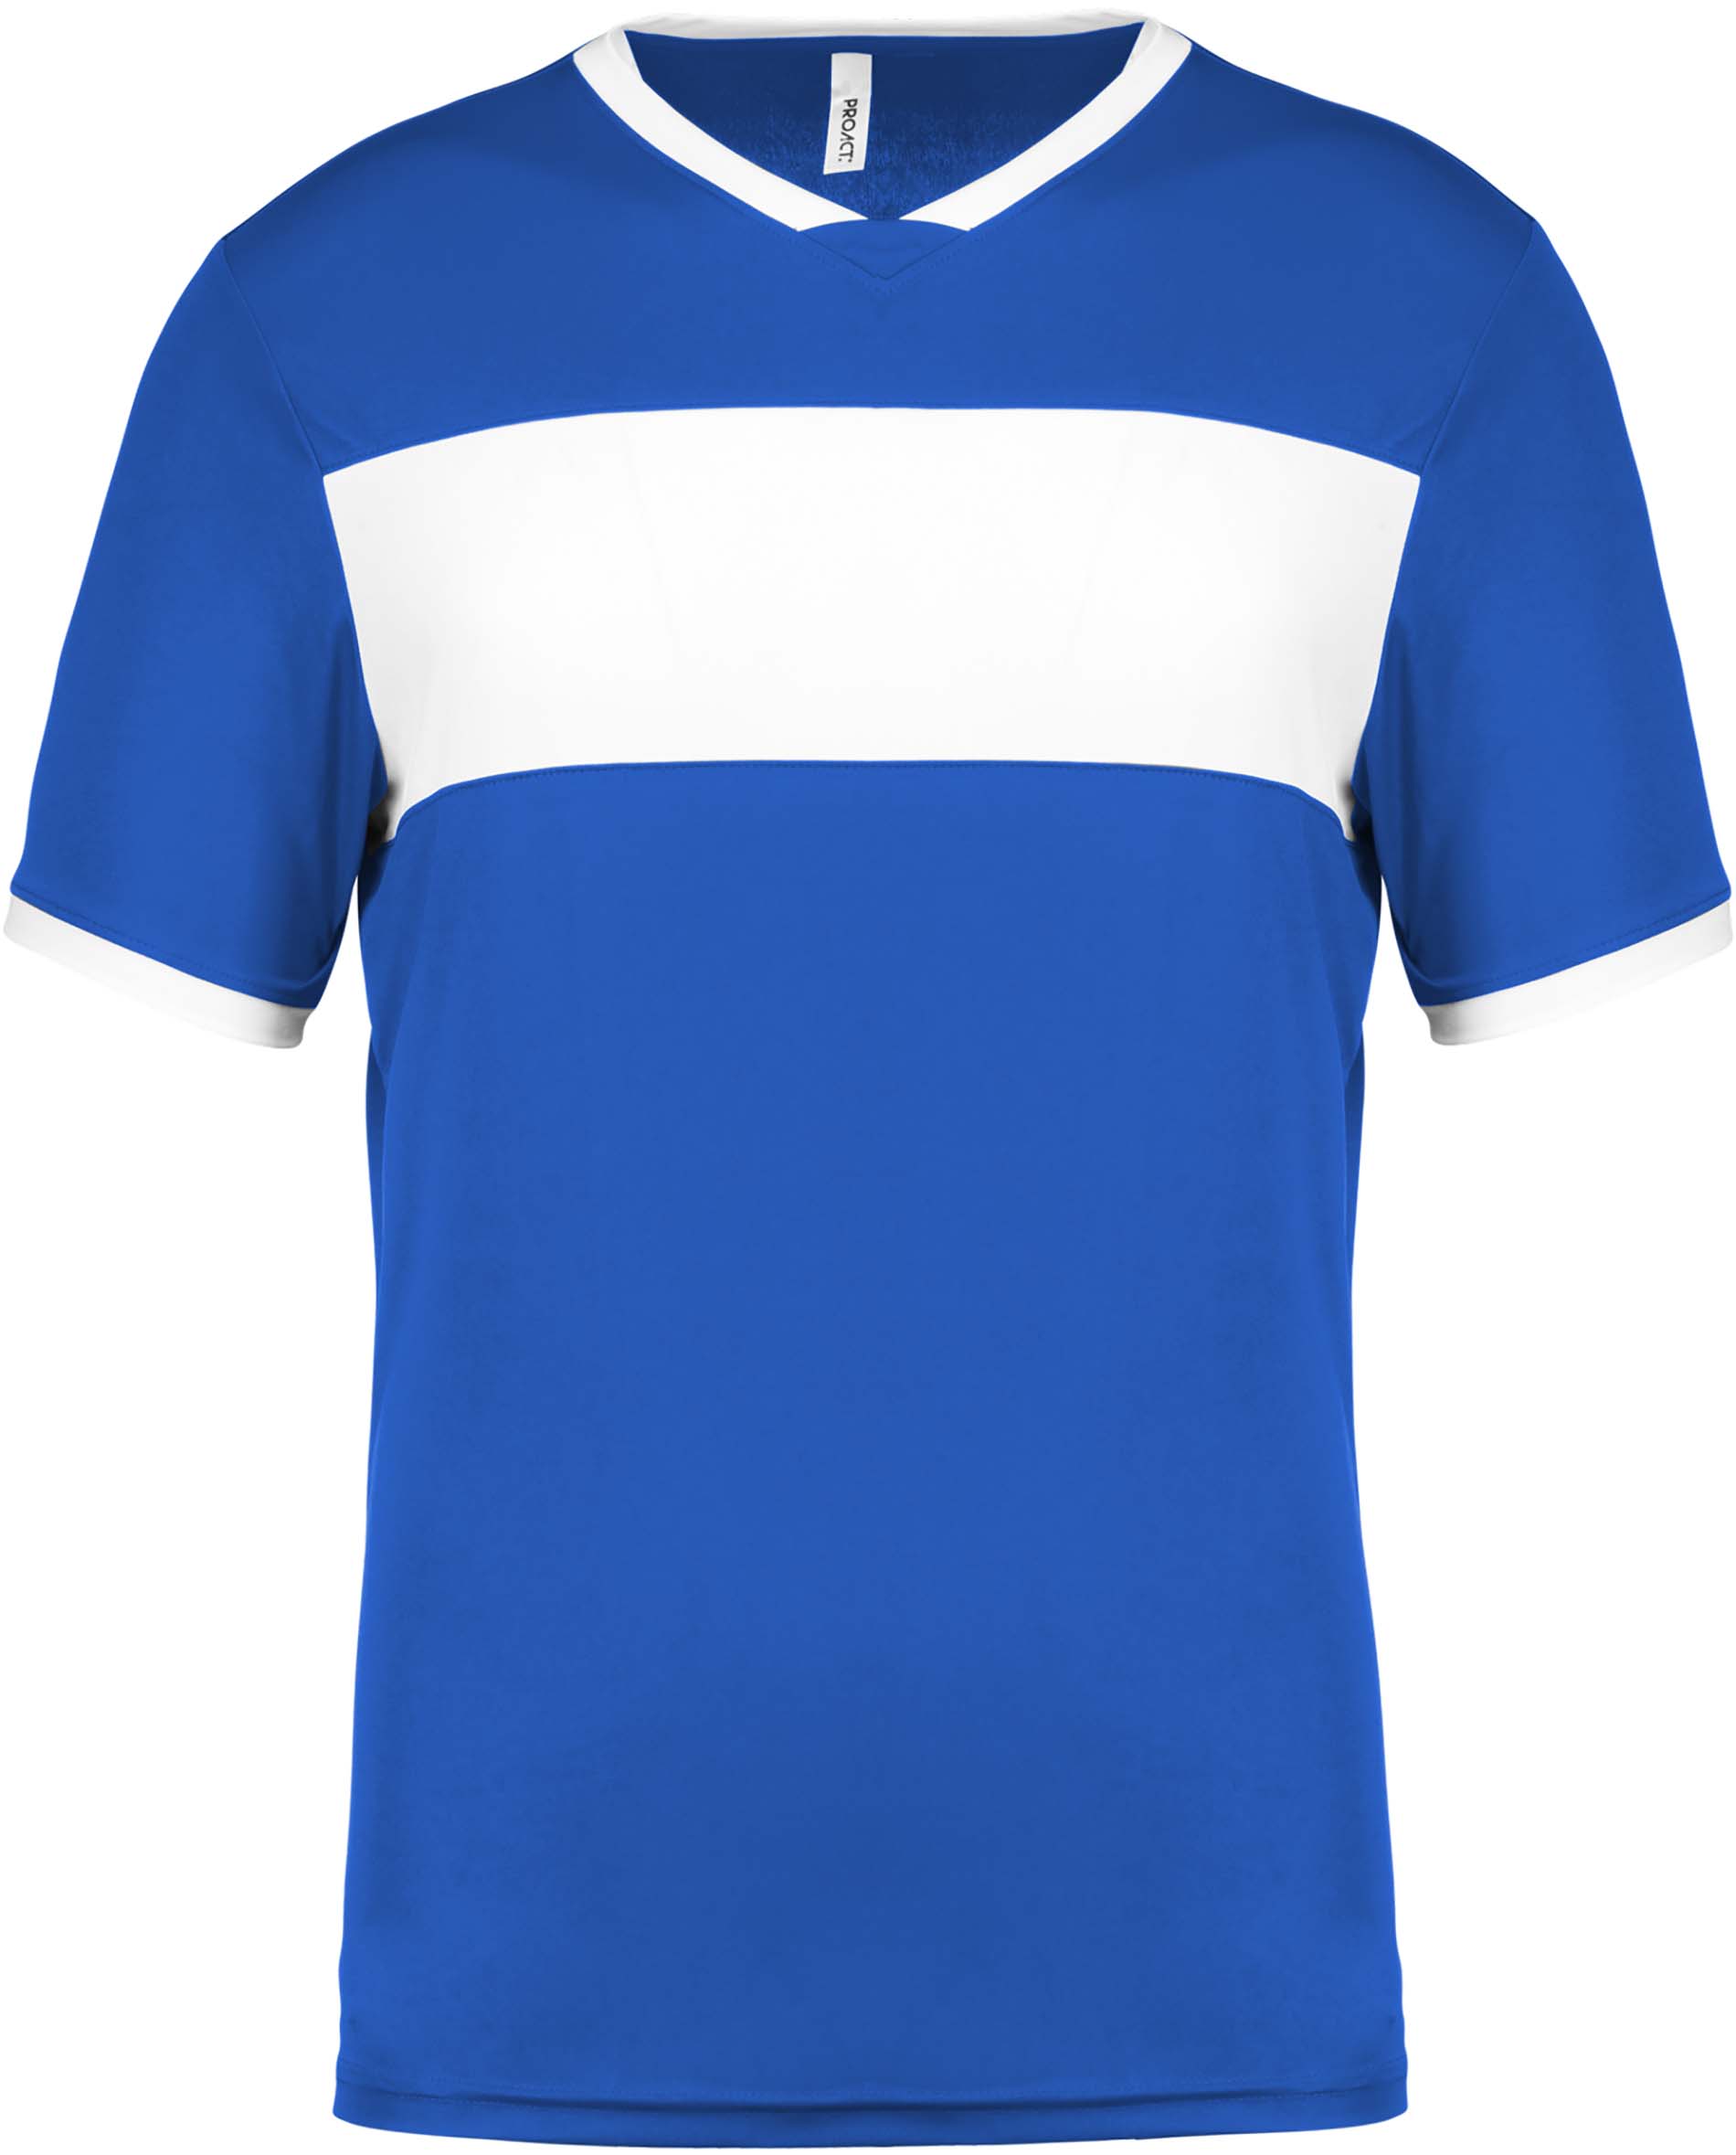 Maillot de rugby manches courtes unisexe - PROACT®